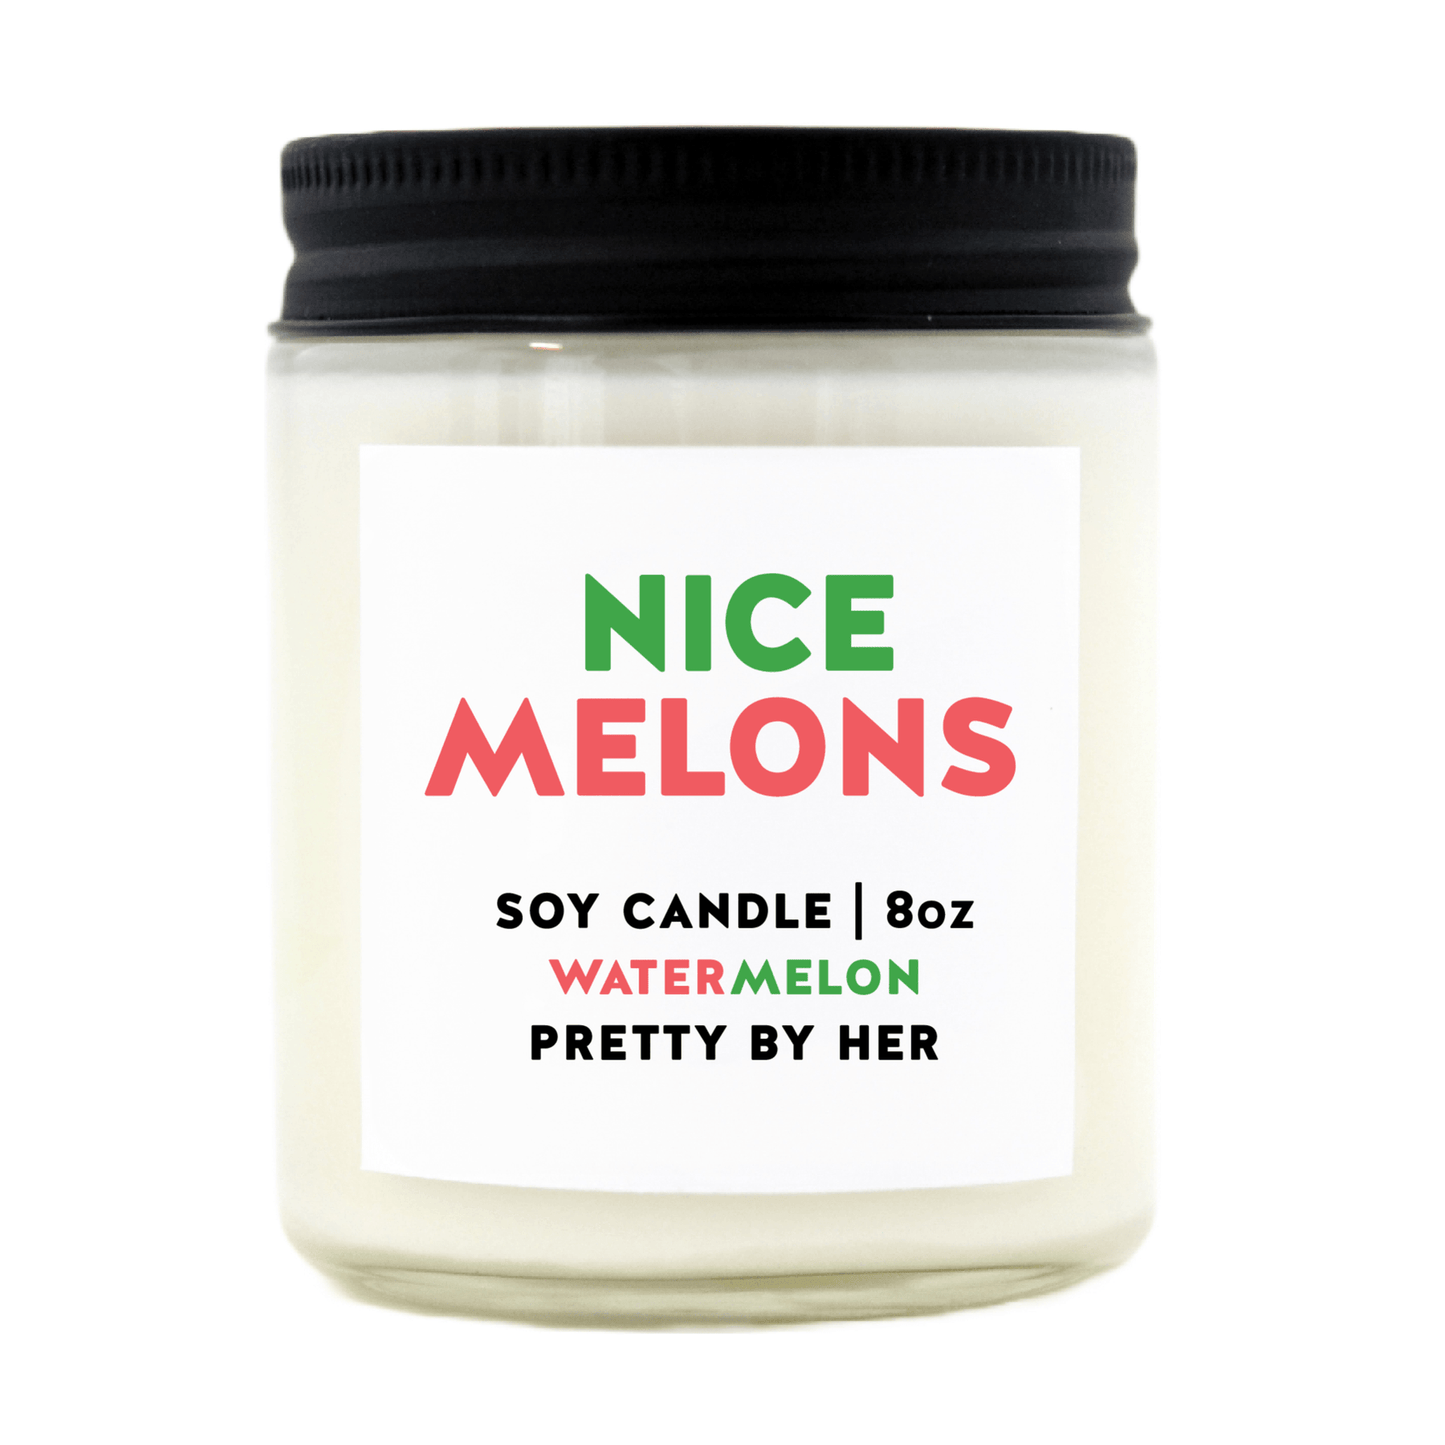 NICE MELONS CANDLE